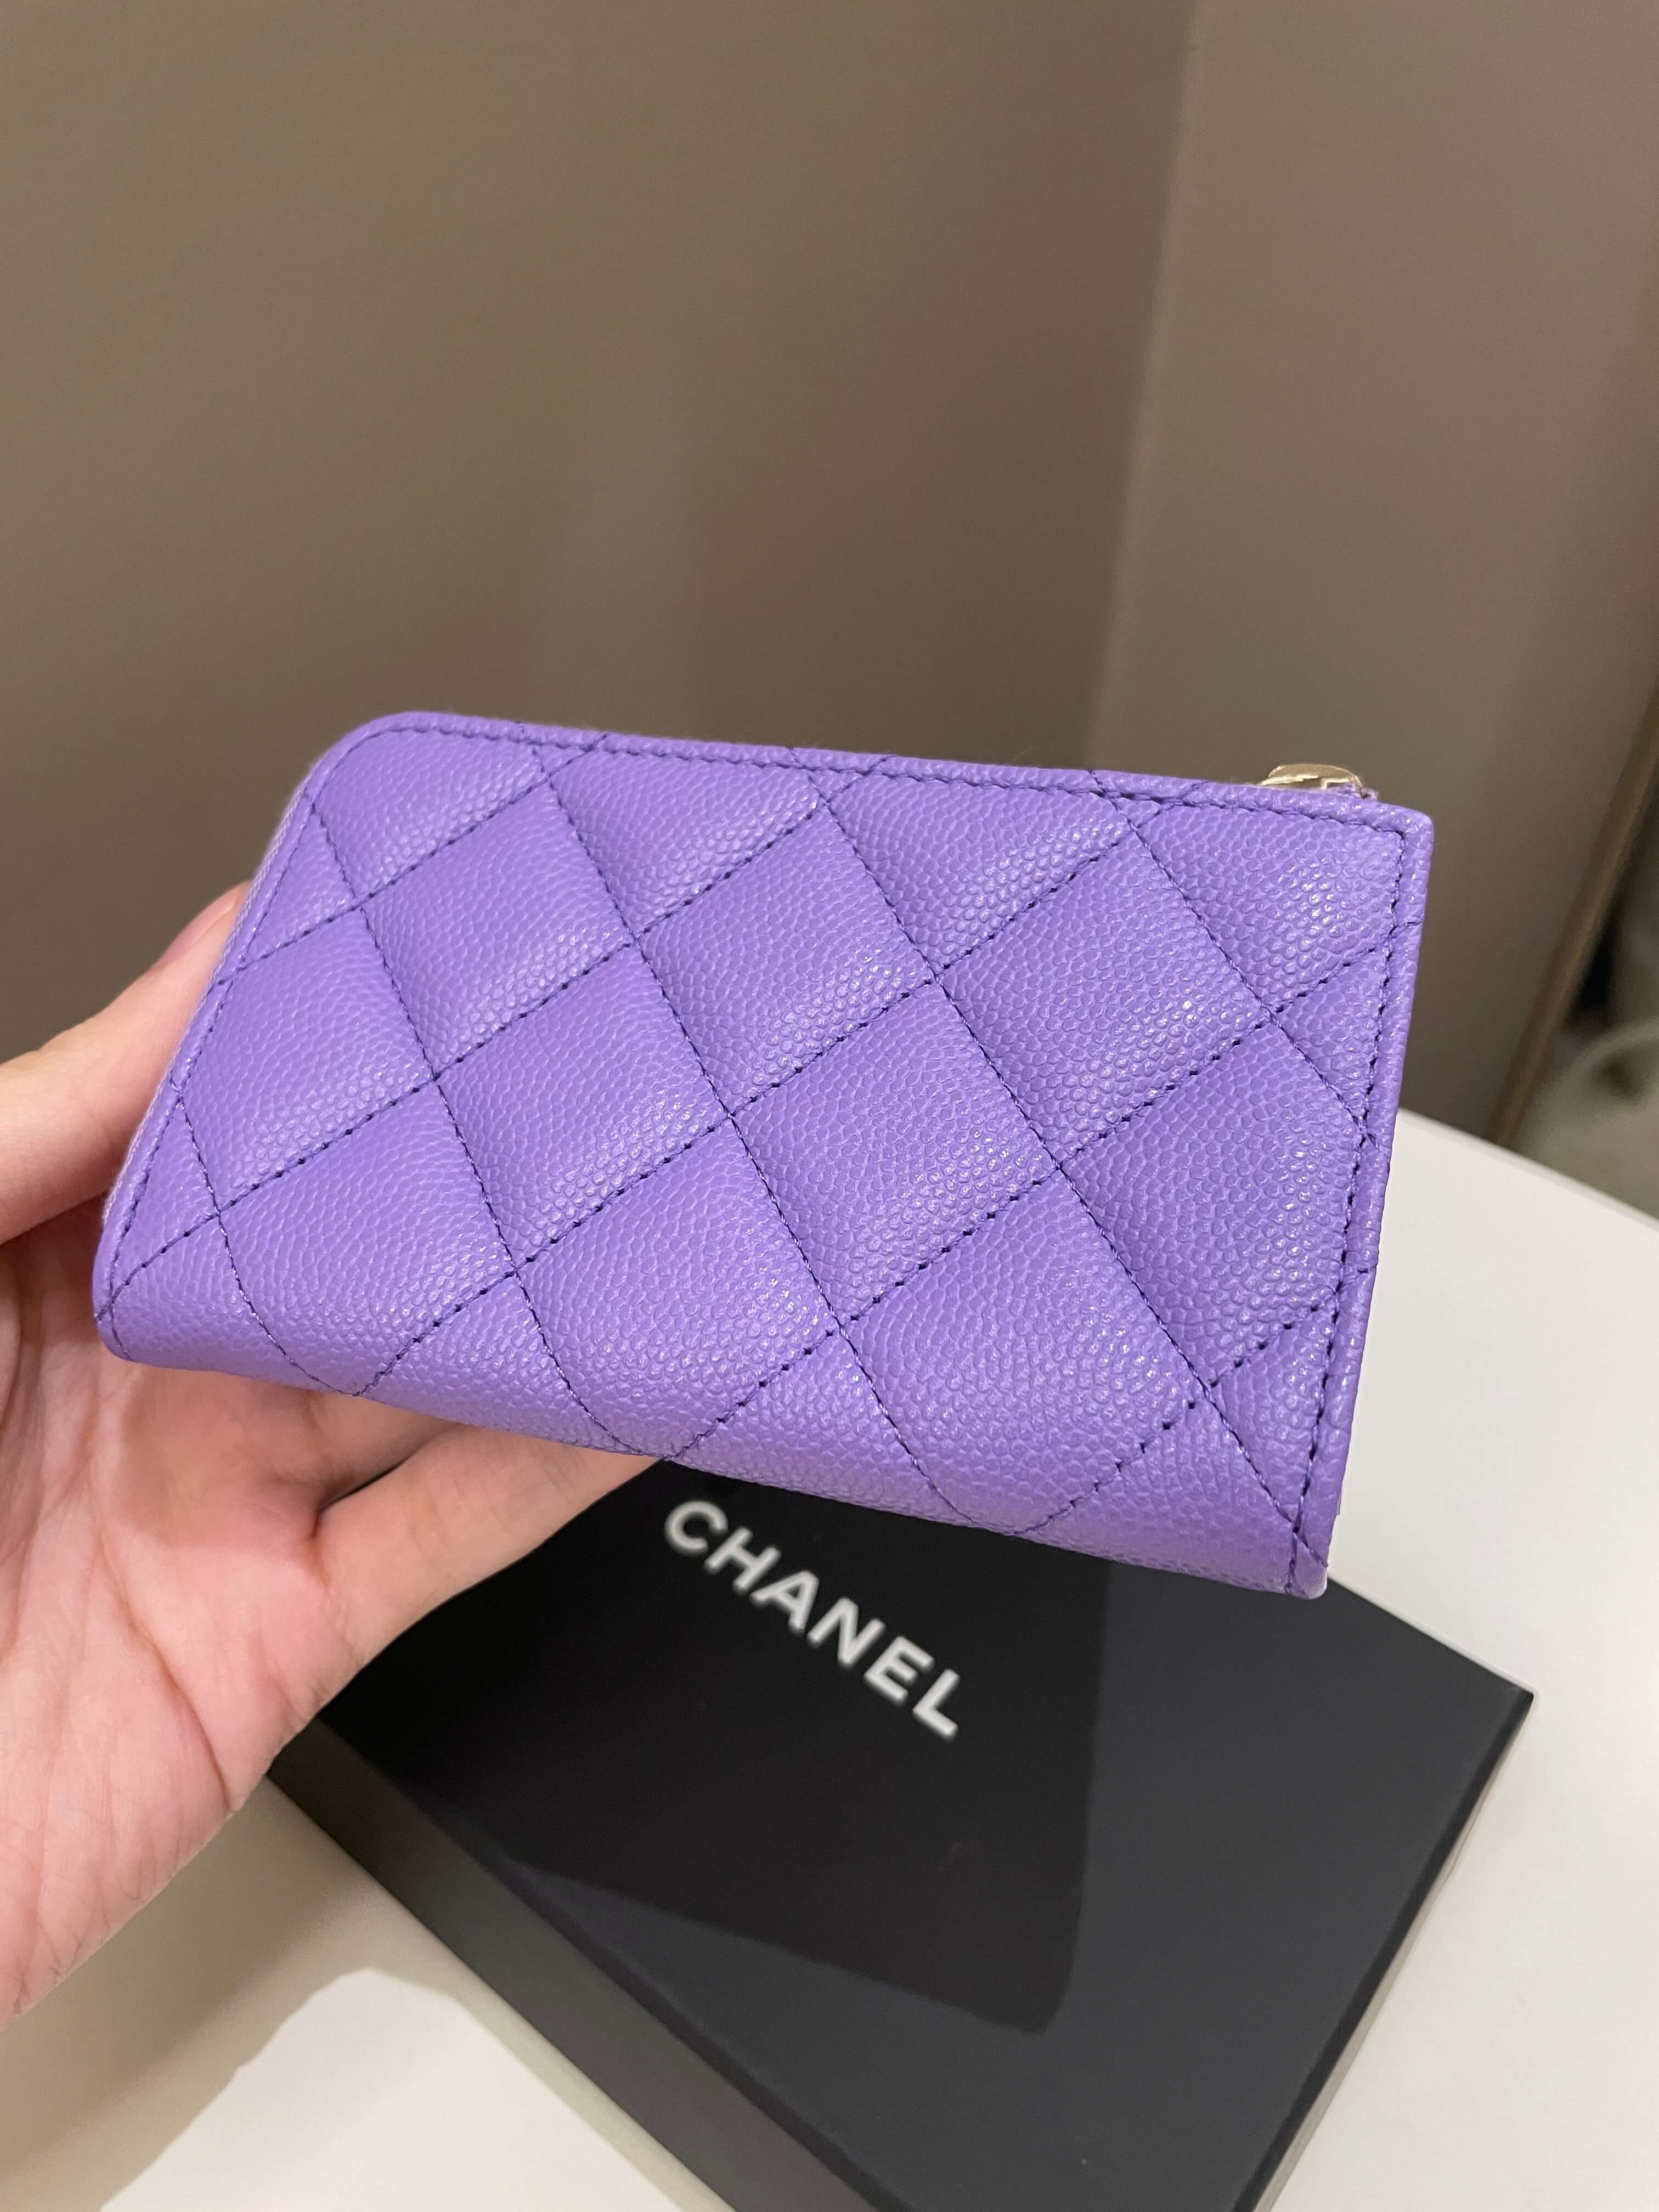 Chanel Quilted Cc Zipped Key Holder Purple Caviar